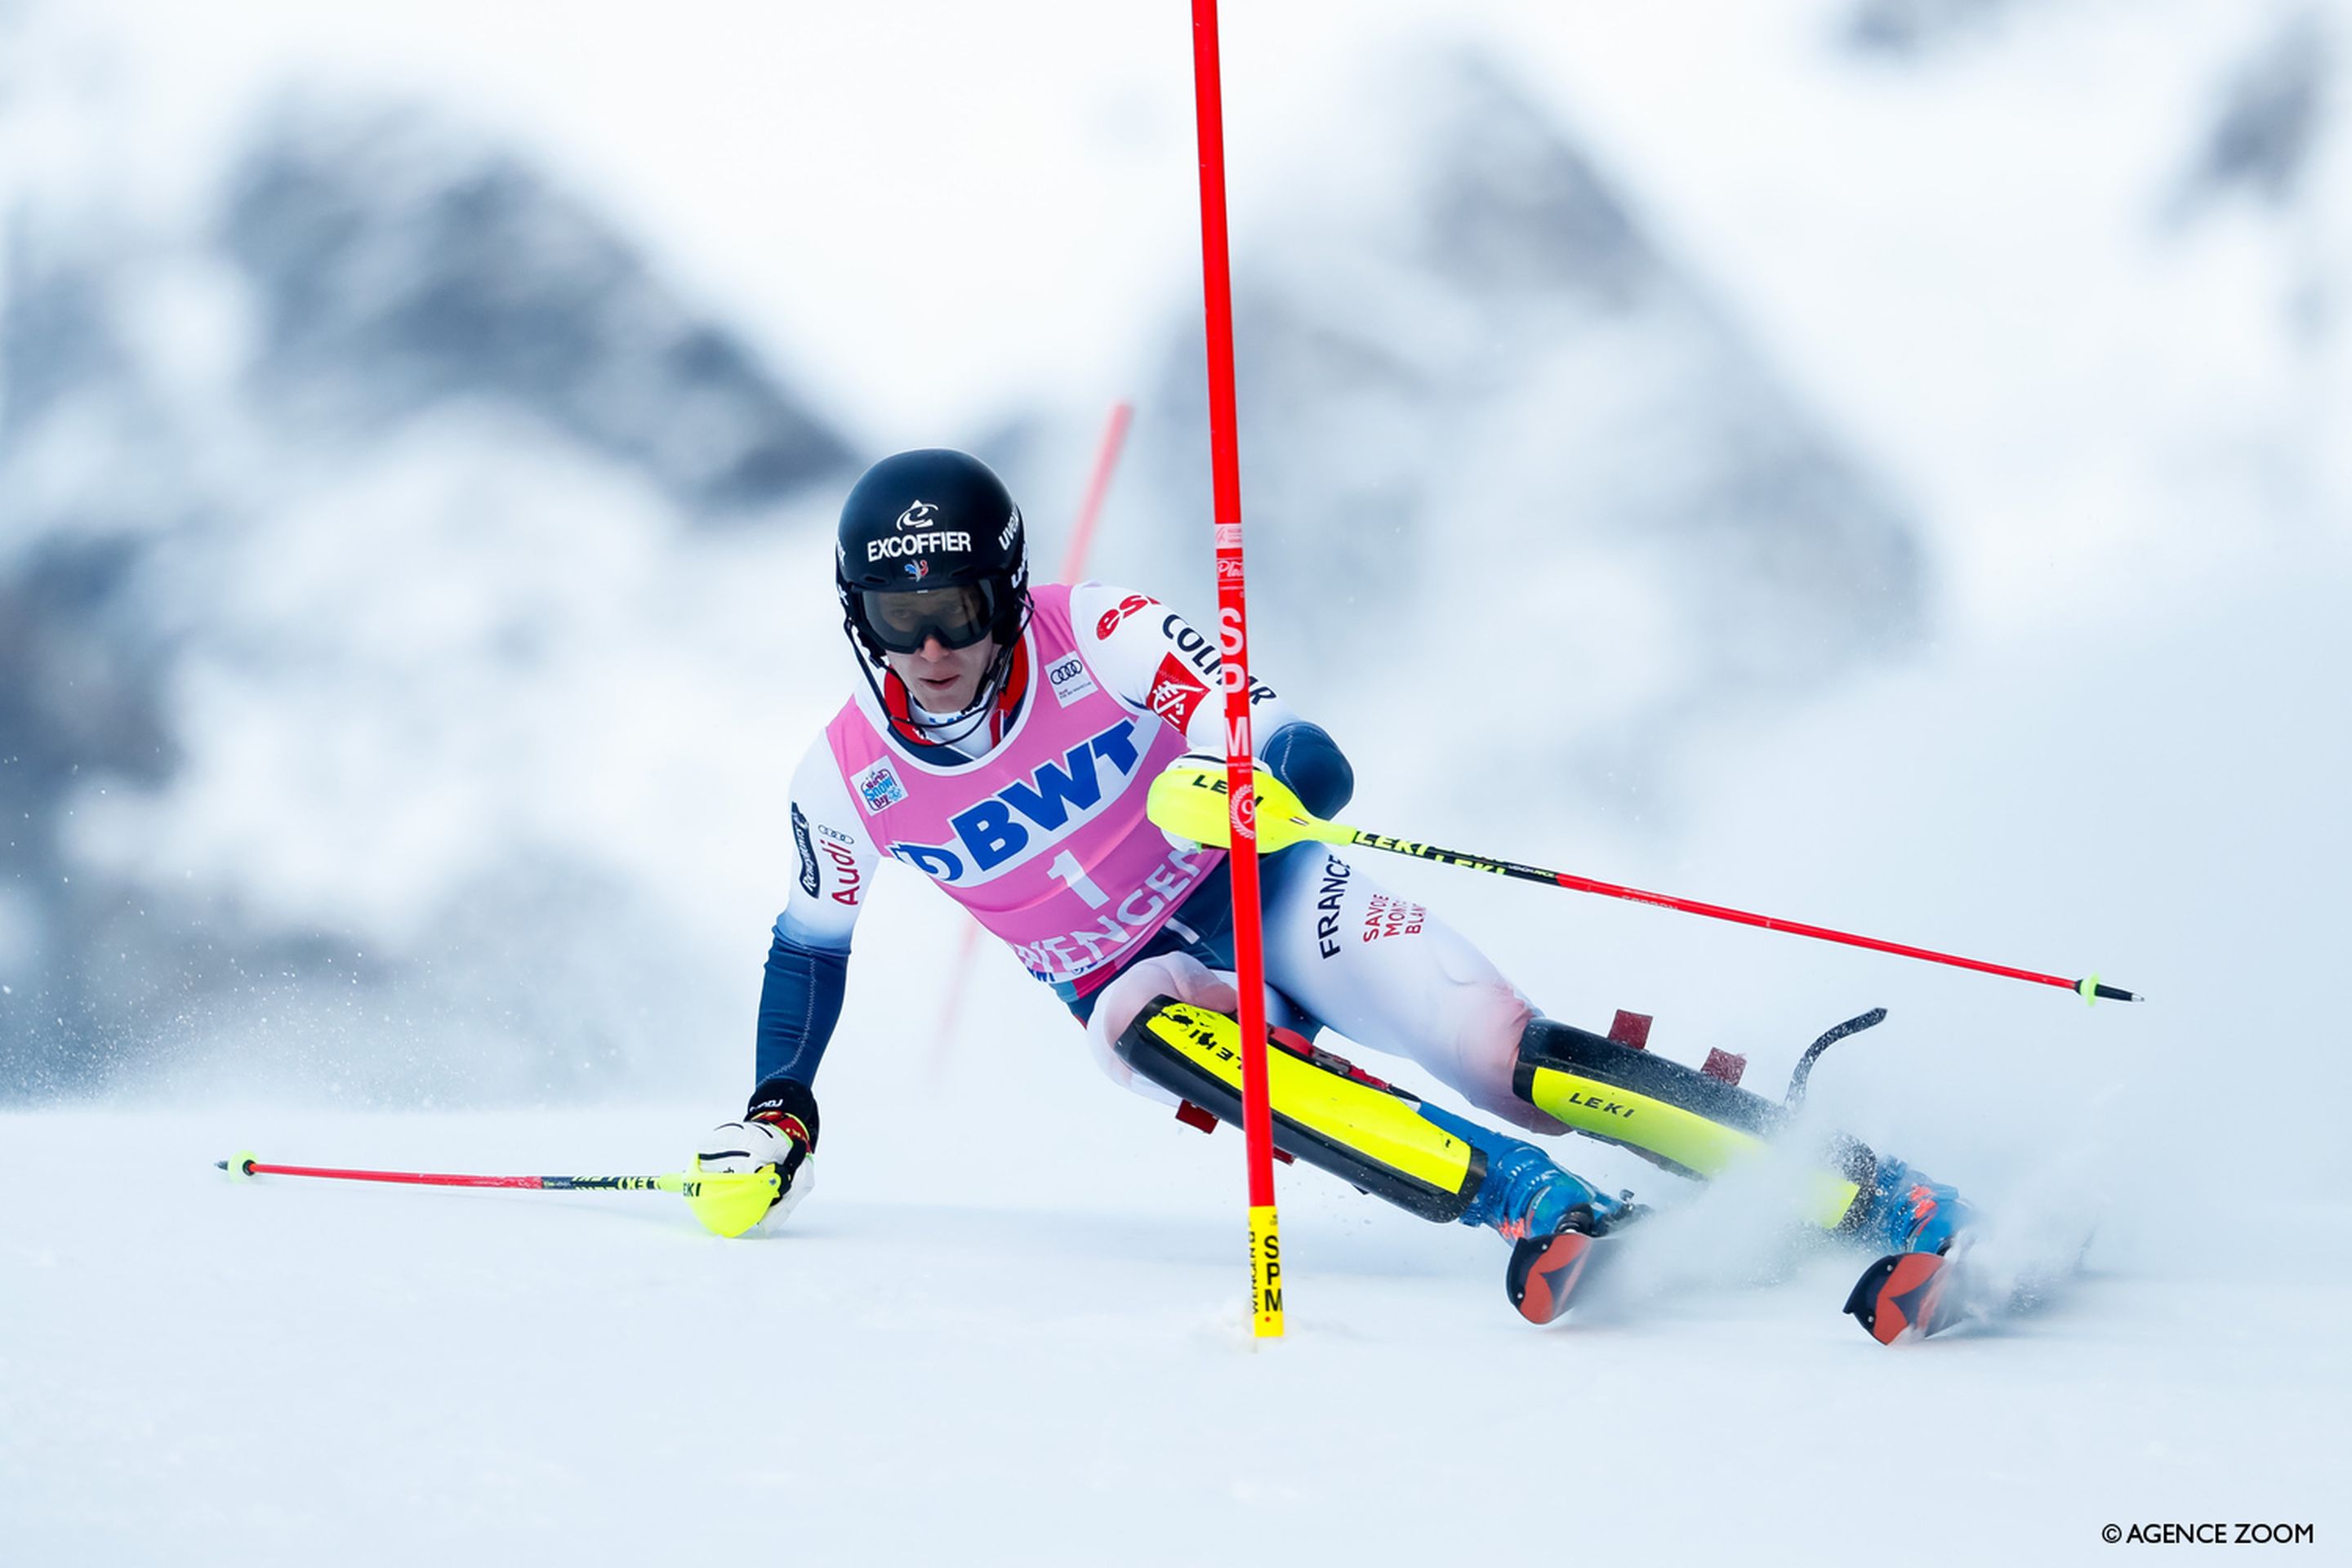 WENGEN, SWITZERLAND - JANUARY 19 : Clement Noel of France competes during the Audi FIS Alpine Ski World Cup Men's Slalom on January 19, 2020 in Wengen Switzerland. (Photo by Alexis Boichard/Agence Zoom)